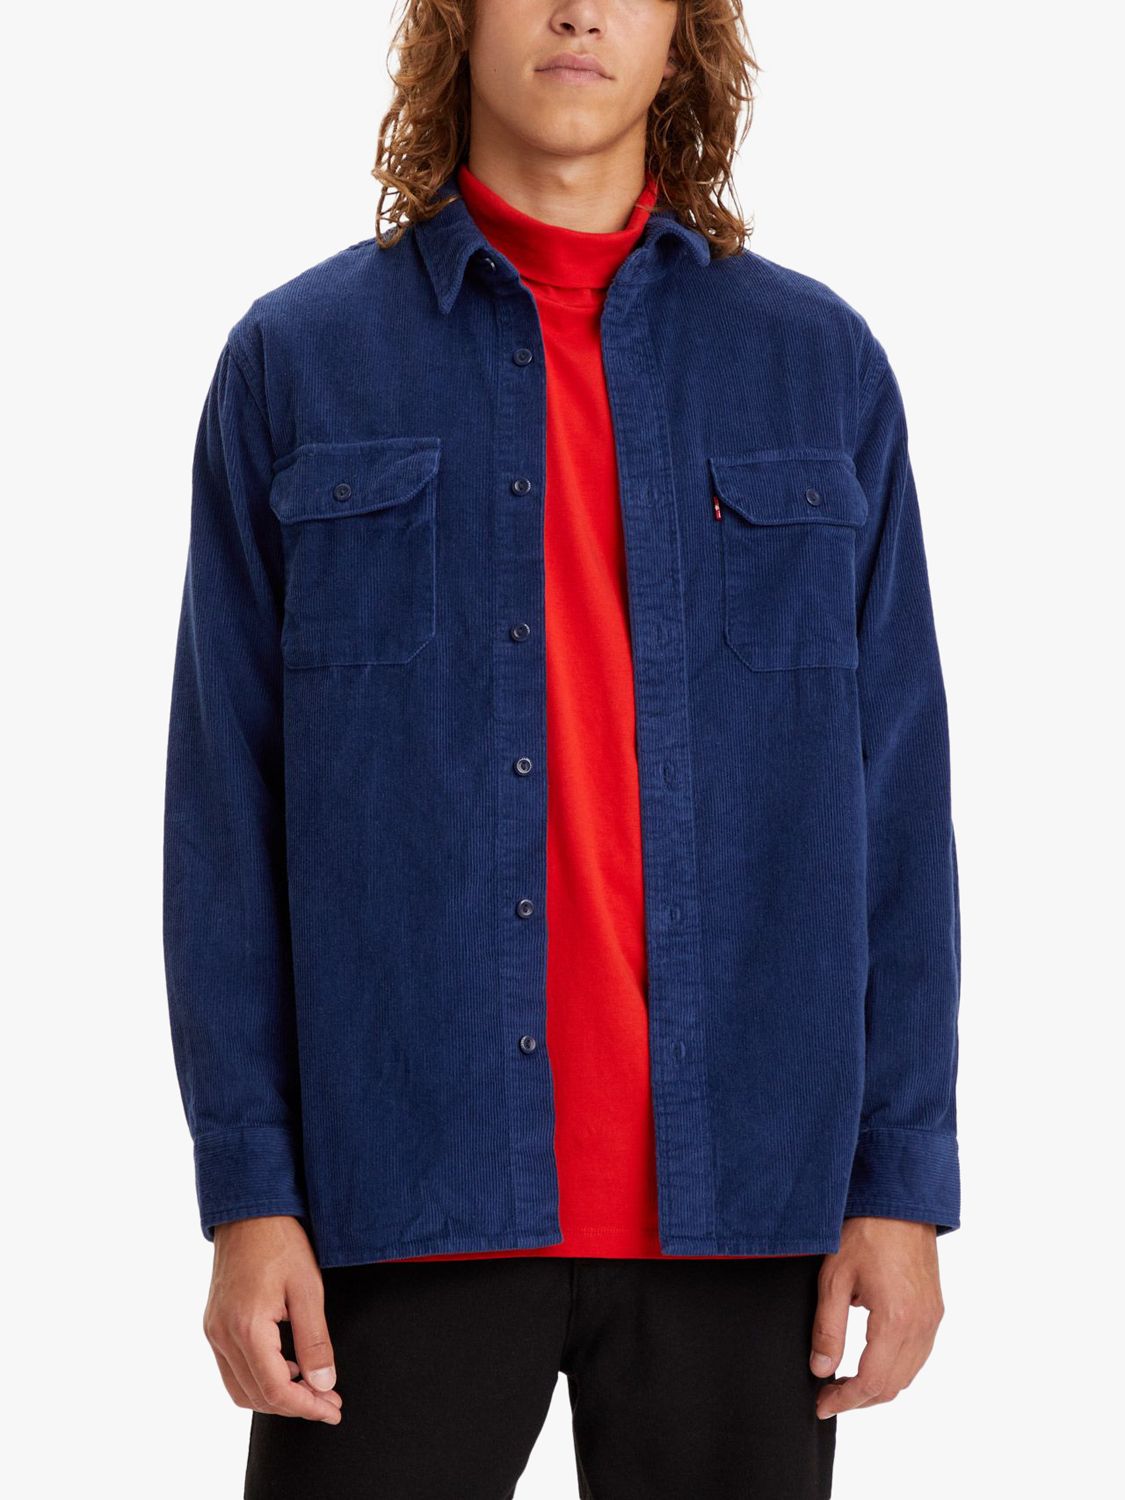 Levi's Classic Worker Shirt, Naval Academy at John Lewis & Partners